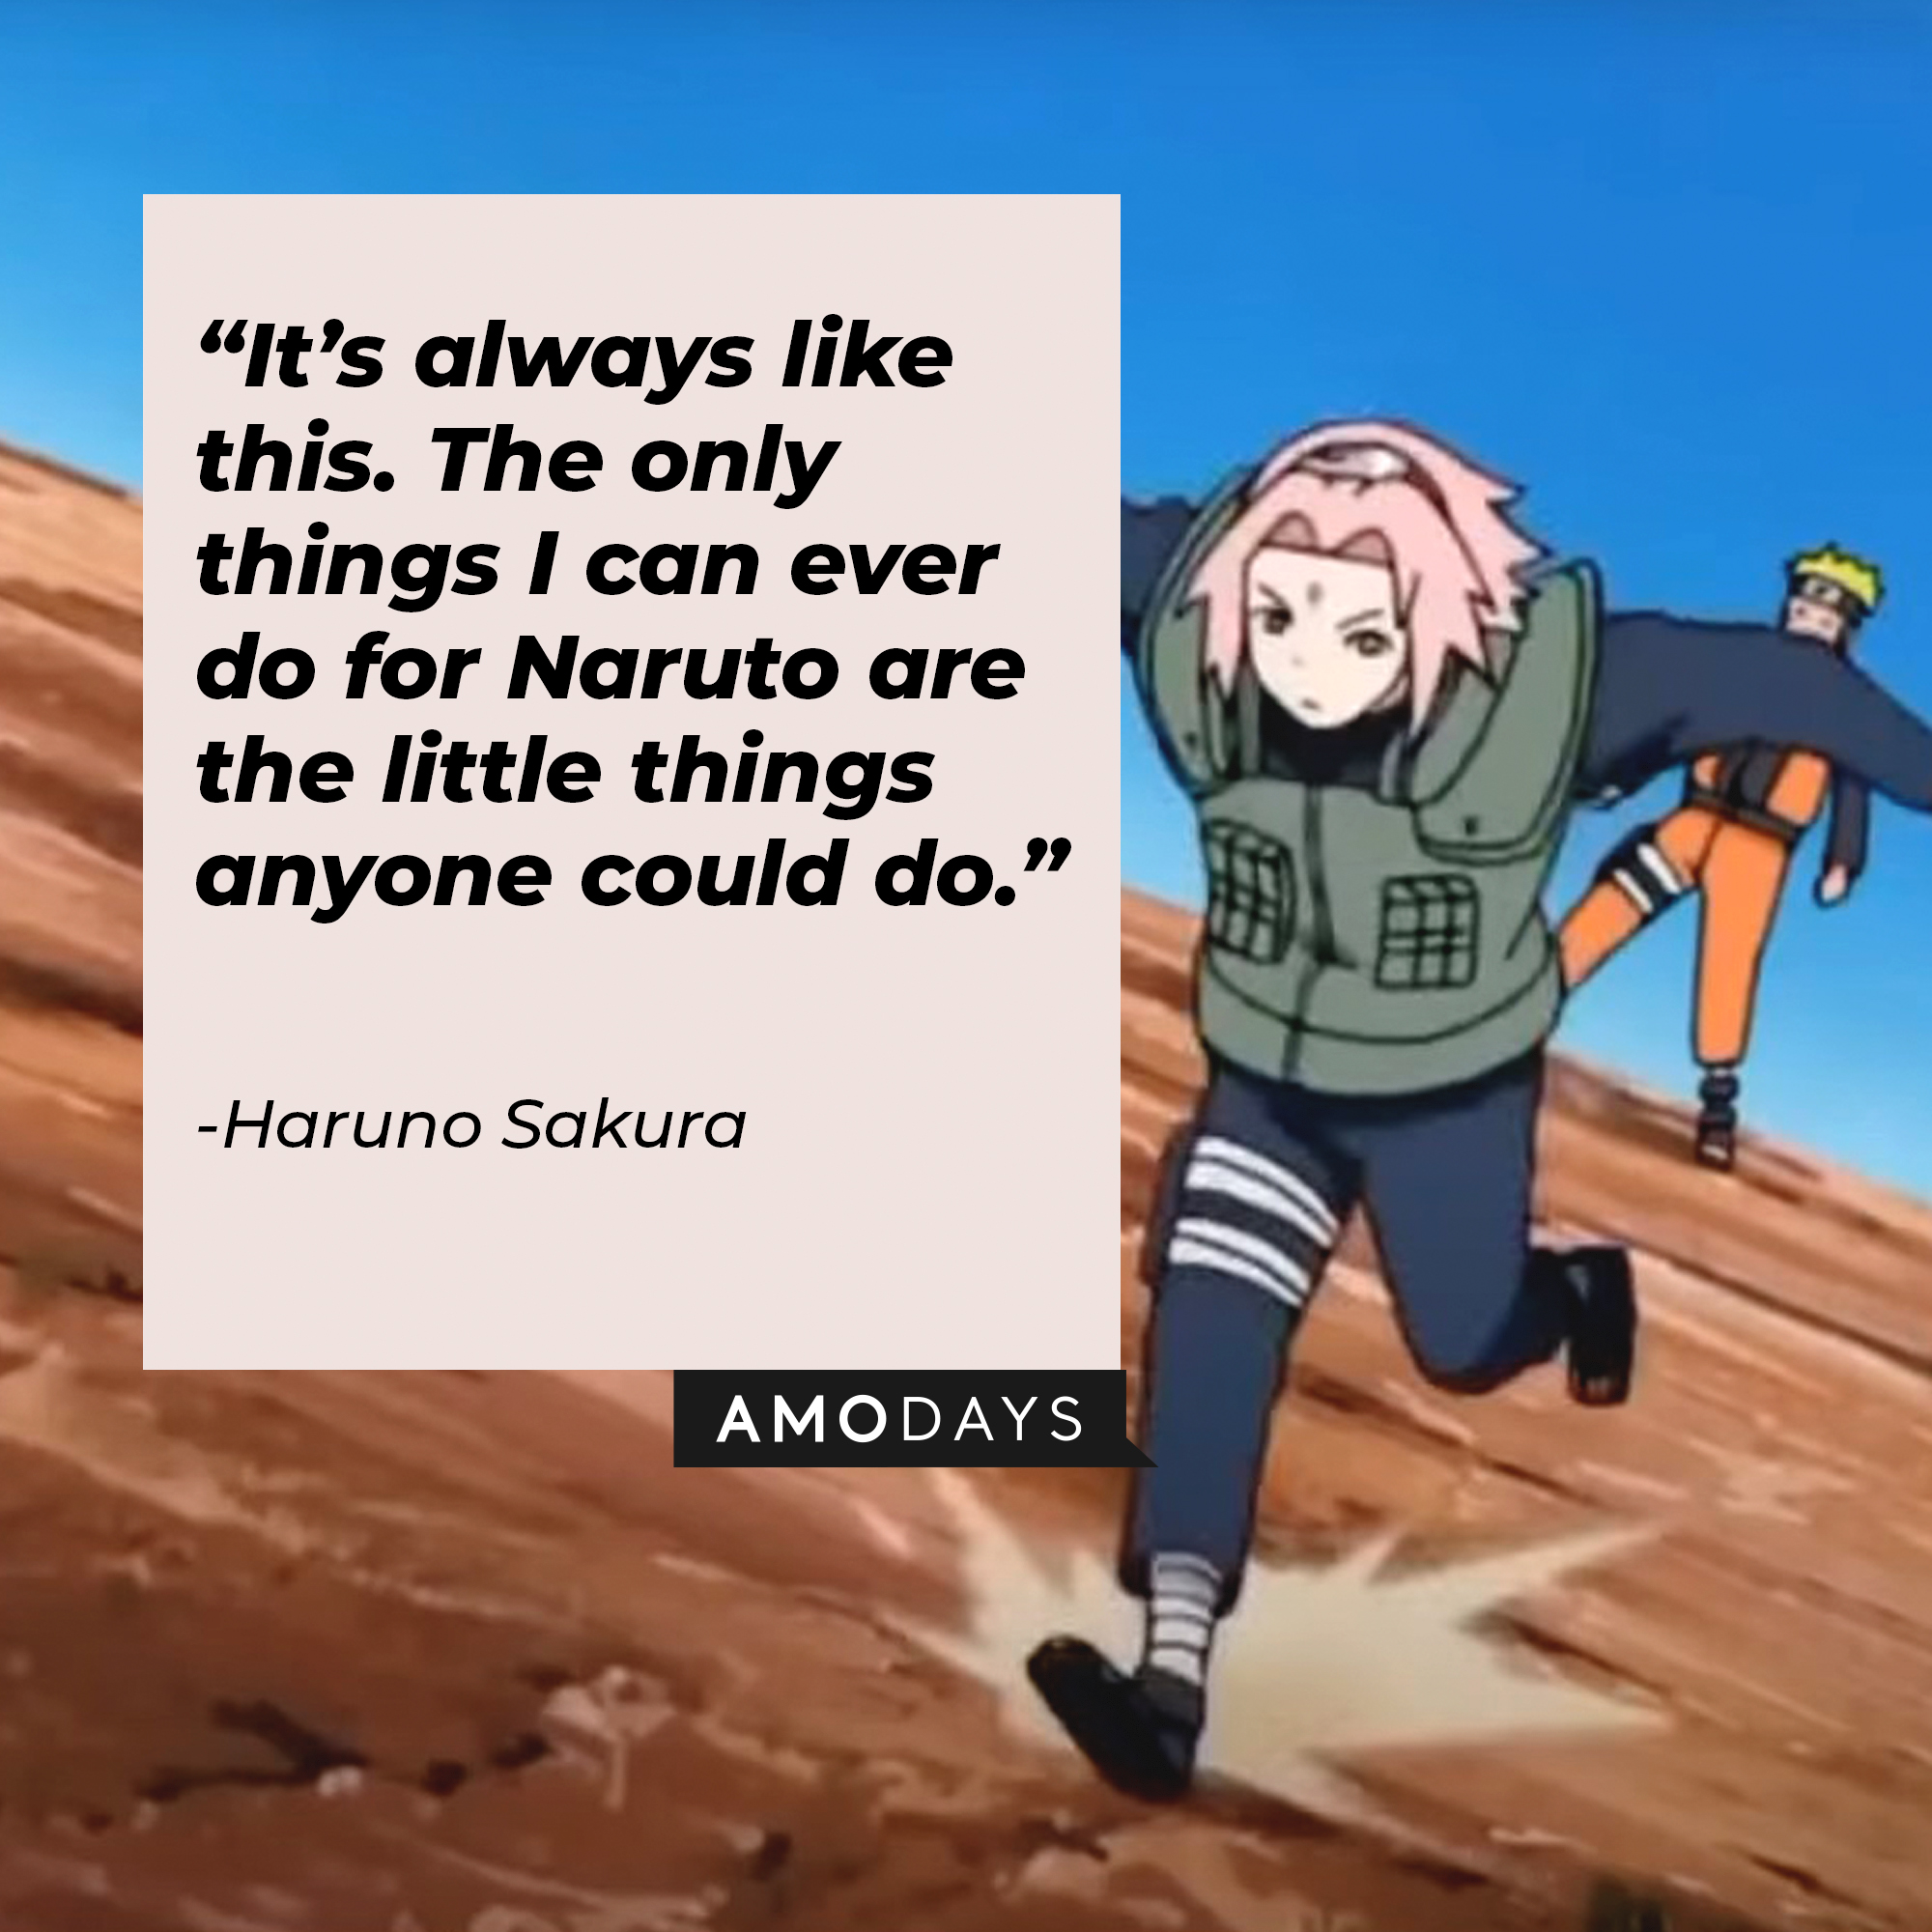 Haruno Sakura’s quote: “It’s always like this. The only things I can ever do for Naruto are the little things anyone could do.” | Source: facebook.com/narutoofficialsns